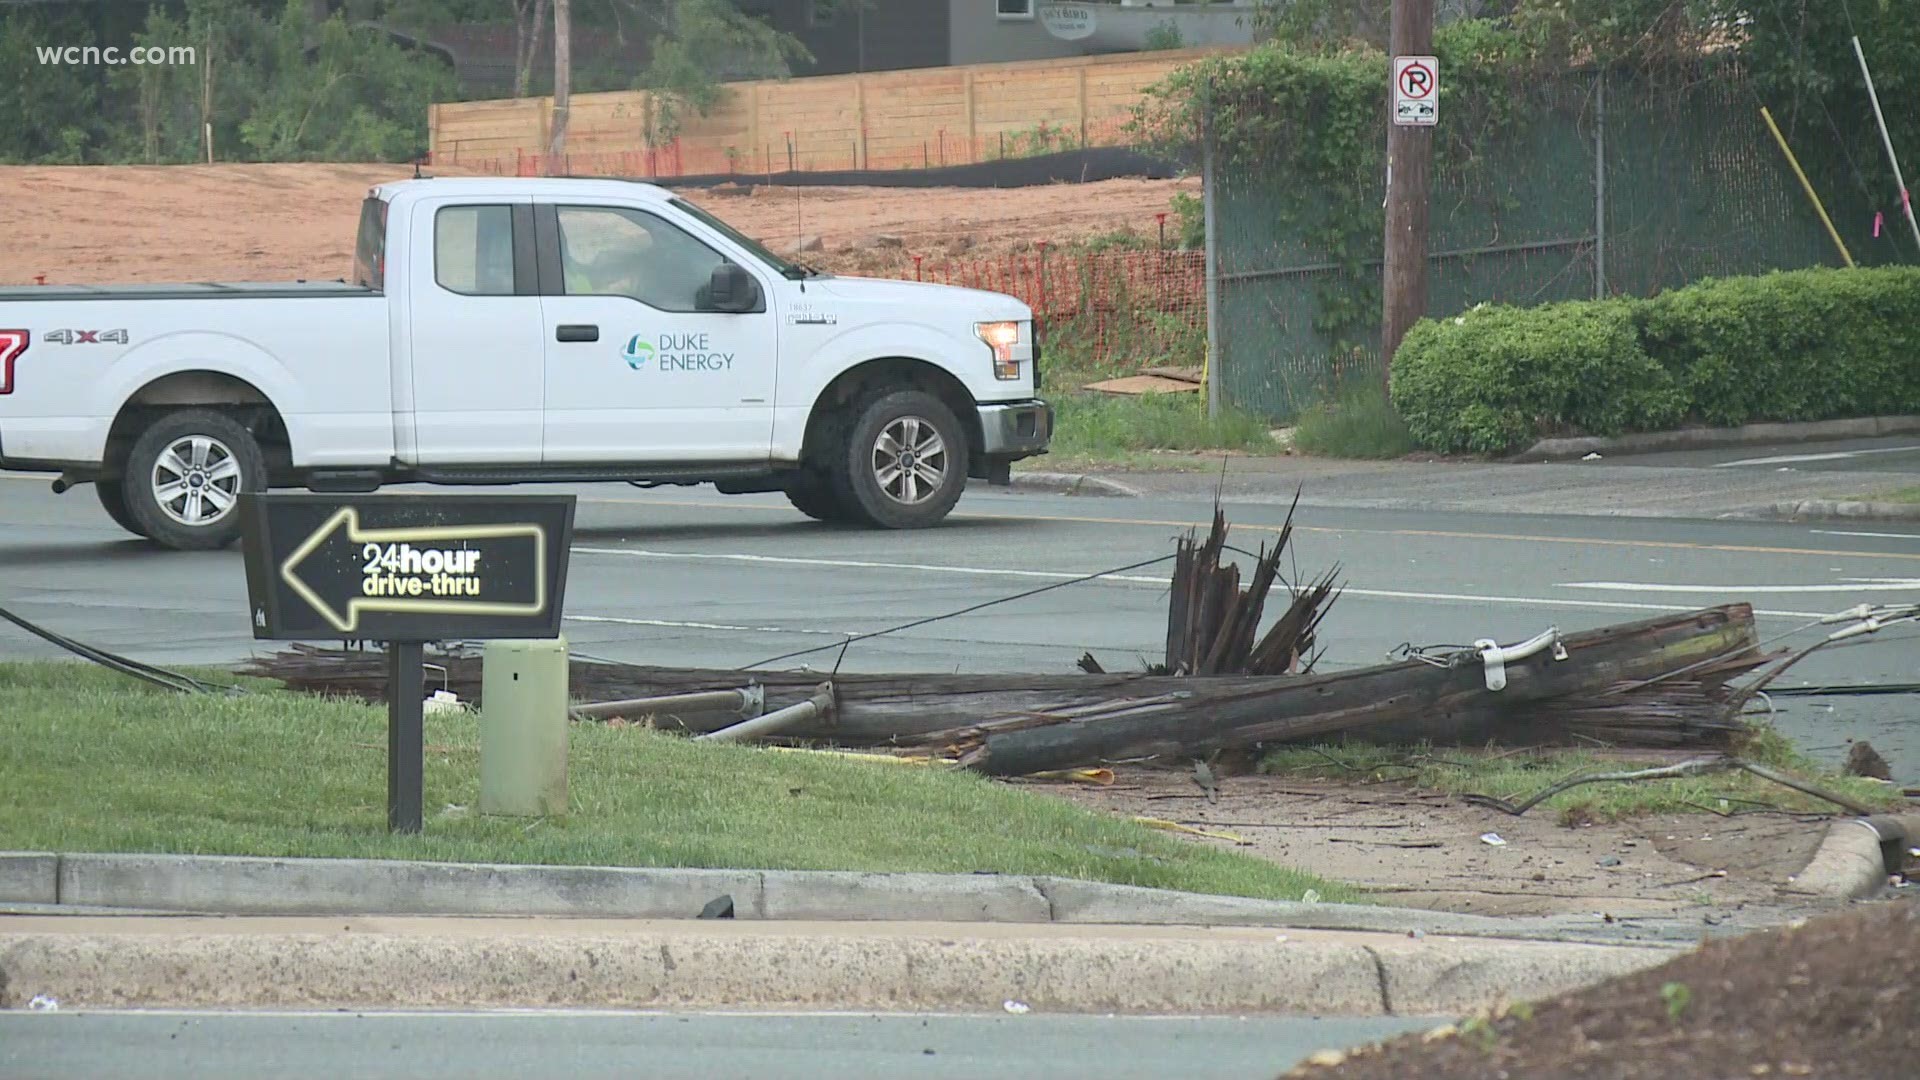 A crash knocked down power lines, shutting down a section of Eastway Drive Wednesday morning.